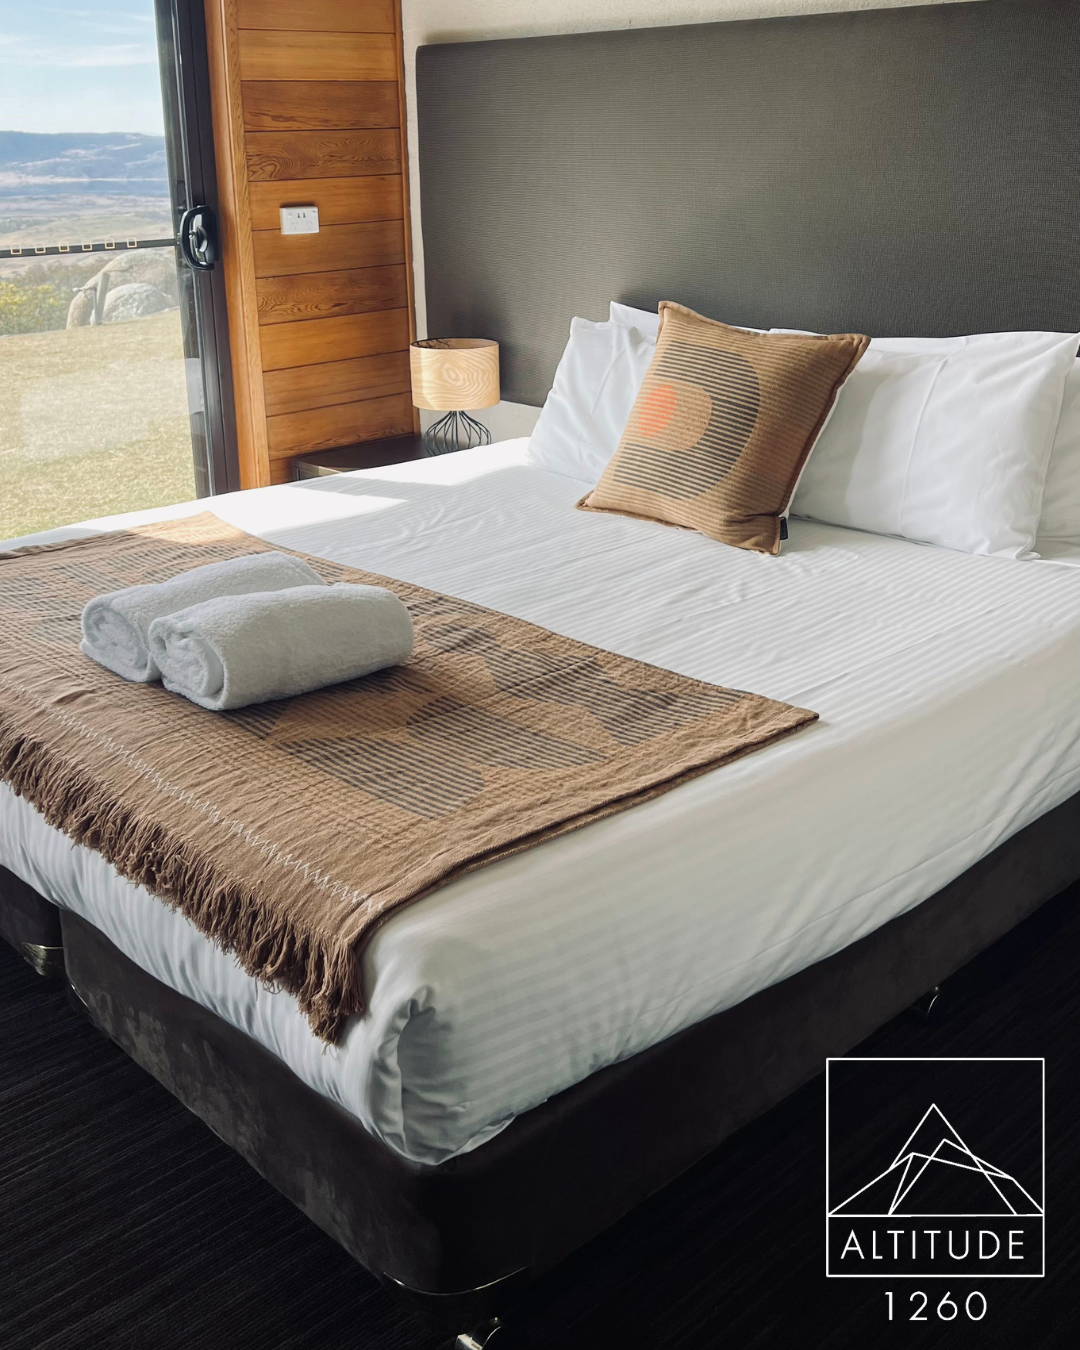 Altitude 1260 is a family-run lodge located on over 255 acres of natural bushland operating all year round. Altitude 1260 boasts breath-taking panoramic views from Lake Jindabyne through to the mountain peaks of Kosciuszko.